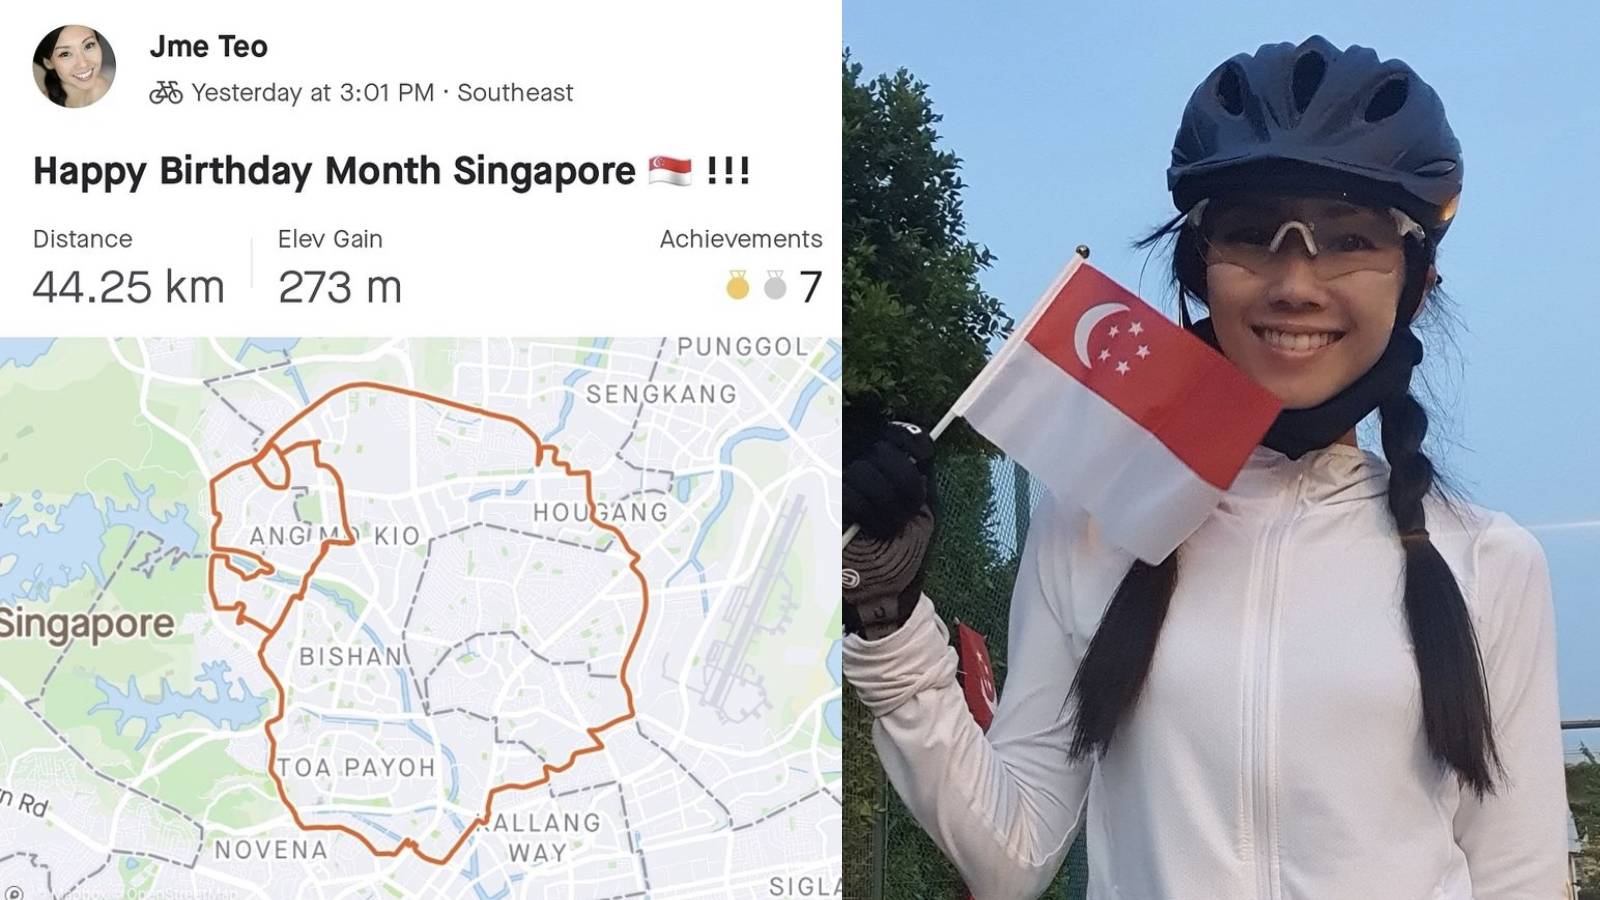 Jaime Teo Did A Bike Ride In The Shape Of The Merlion’s Head To Mark National Day